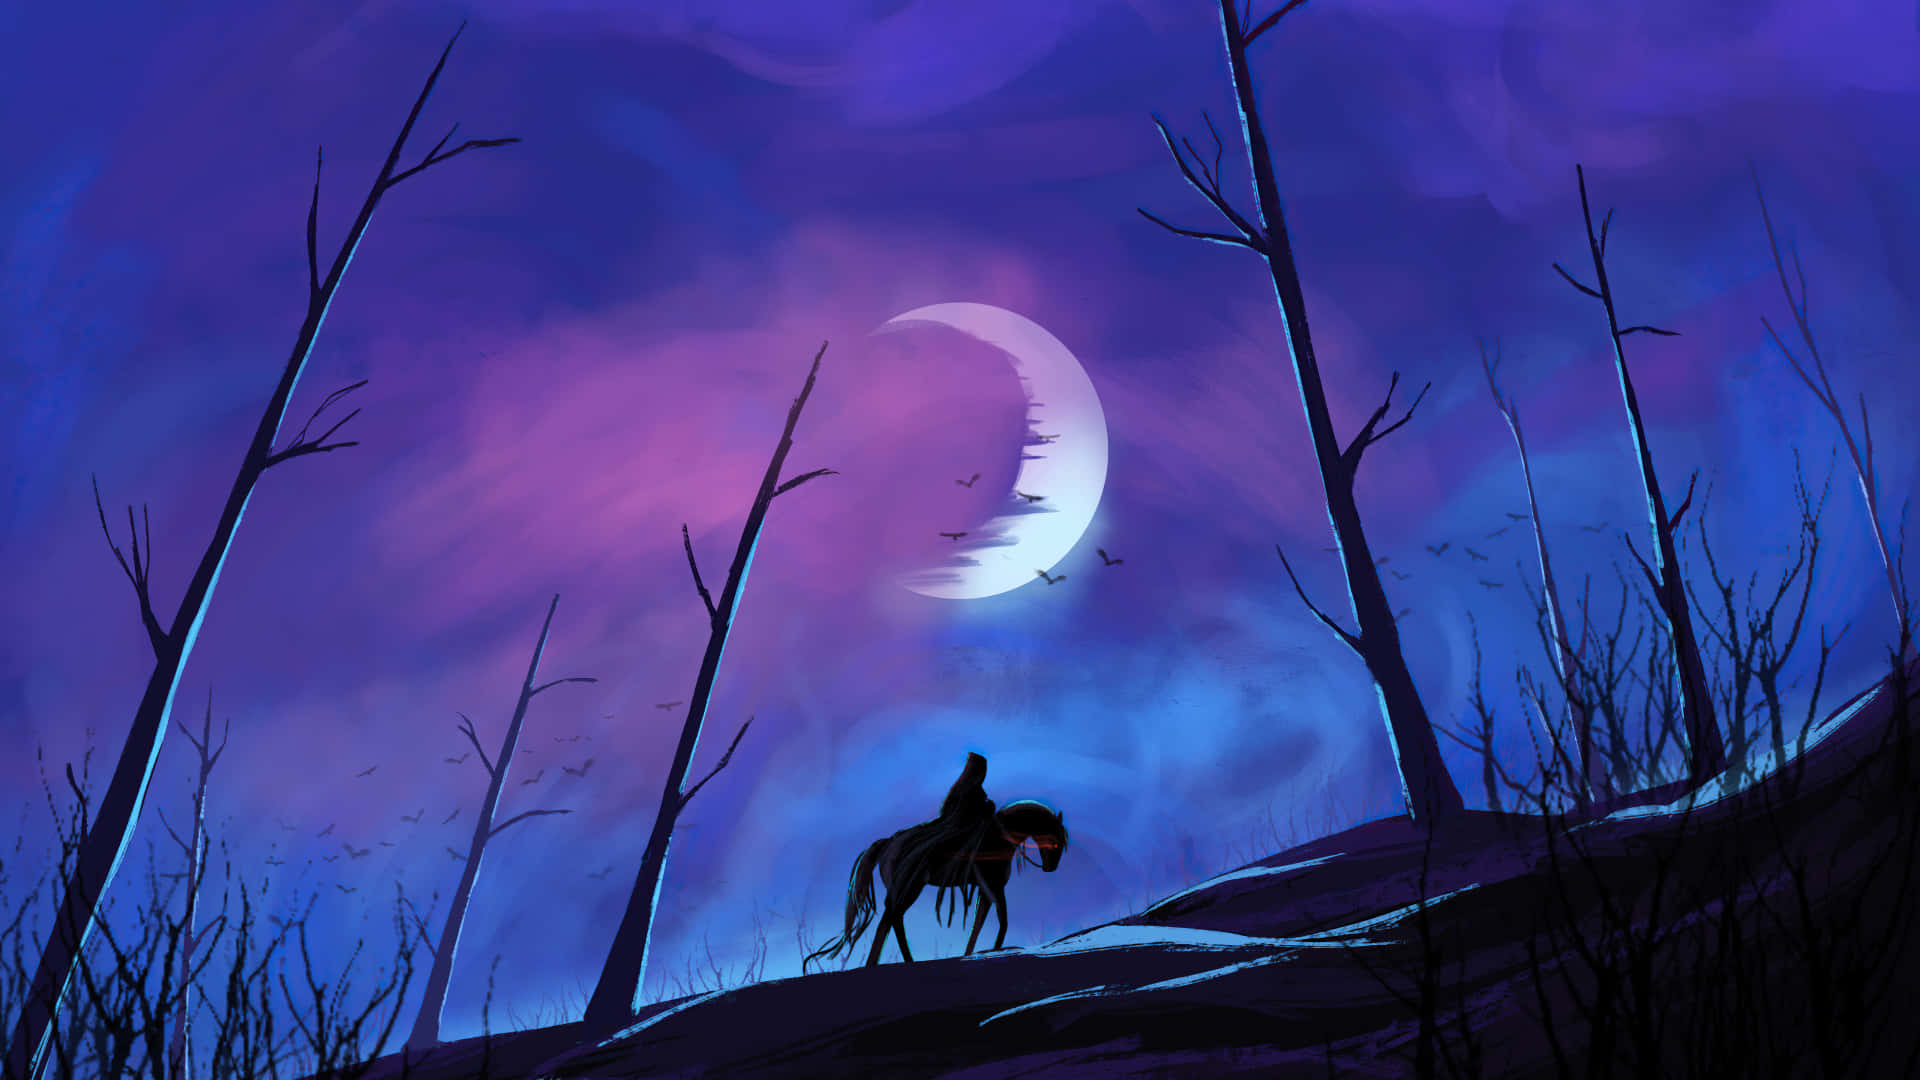 A Man Riding A Horse In The Woods With A Full Moon Wallpaper